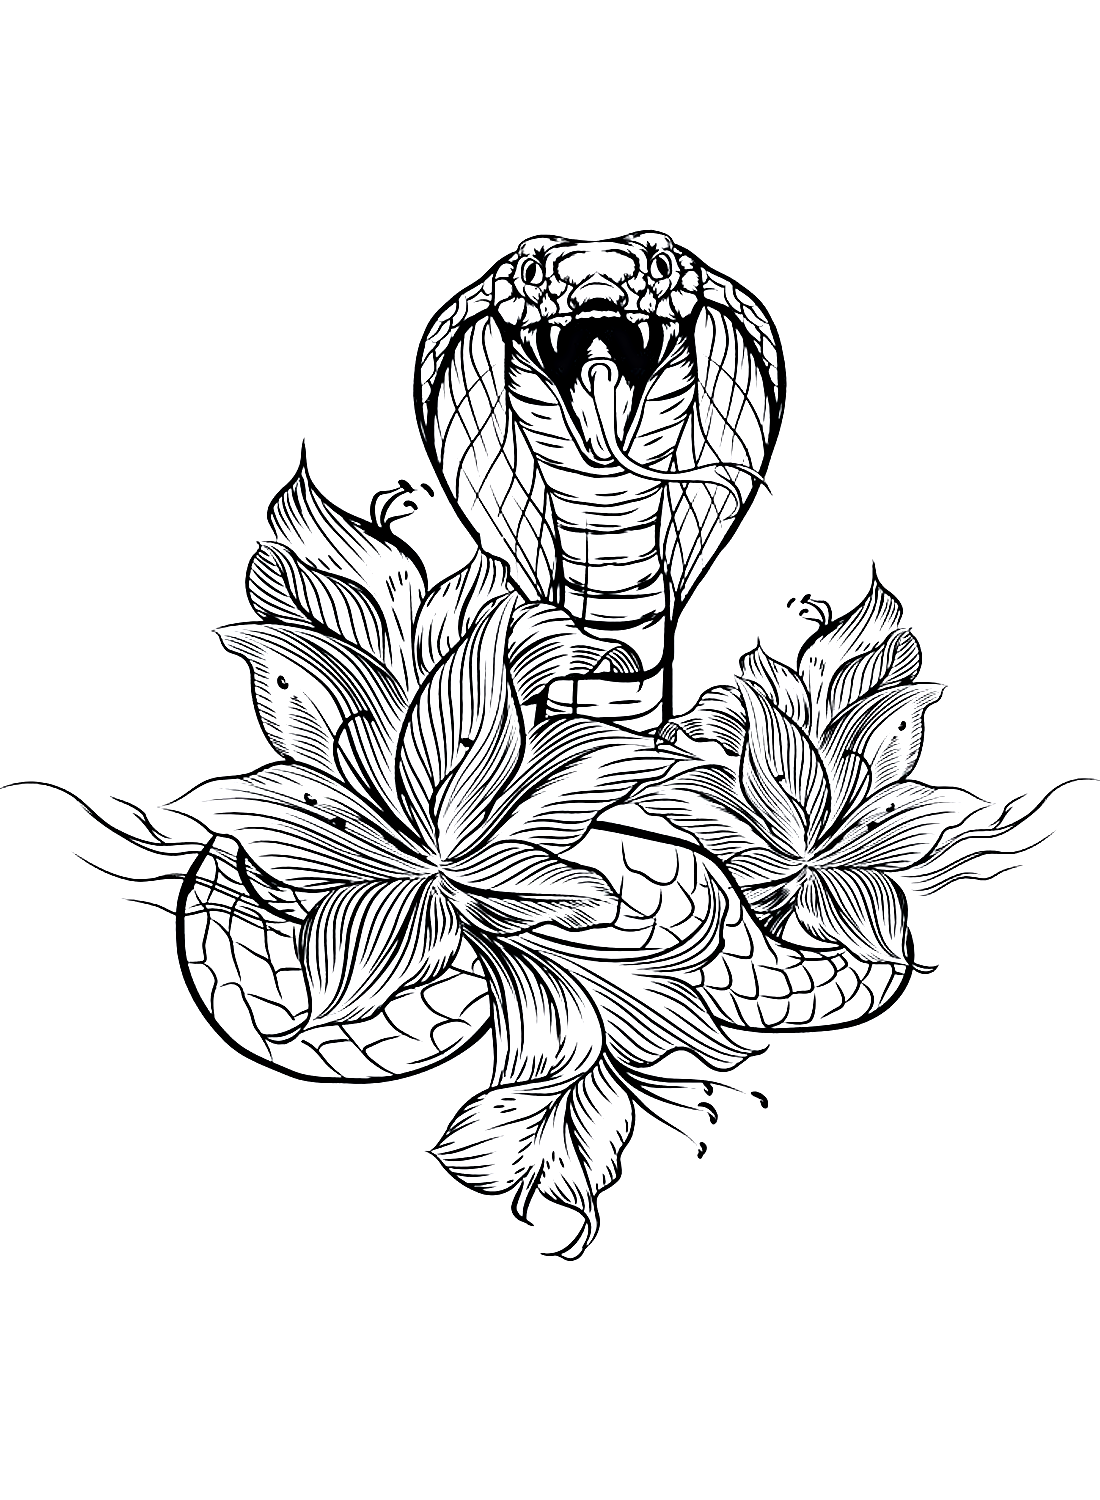 The Cobra and flowers Coloring Pages